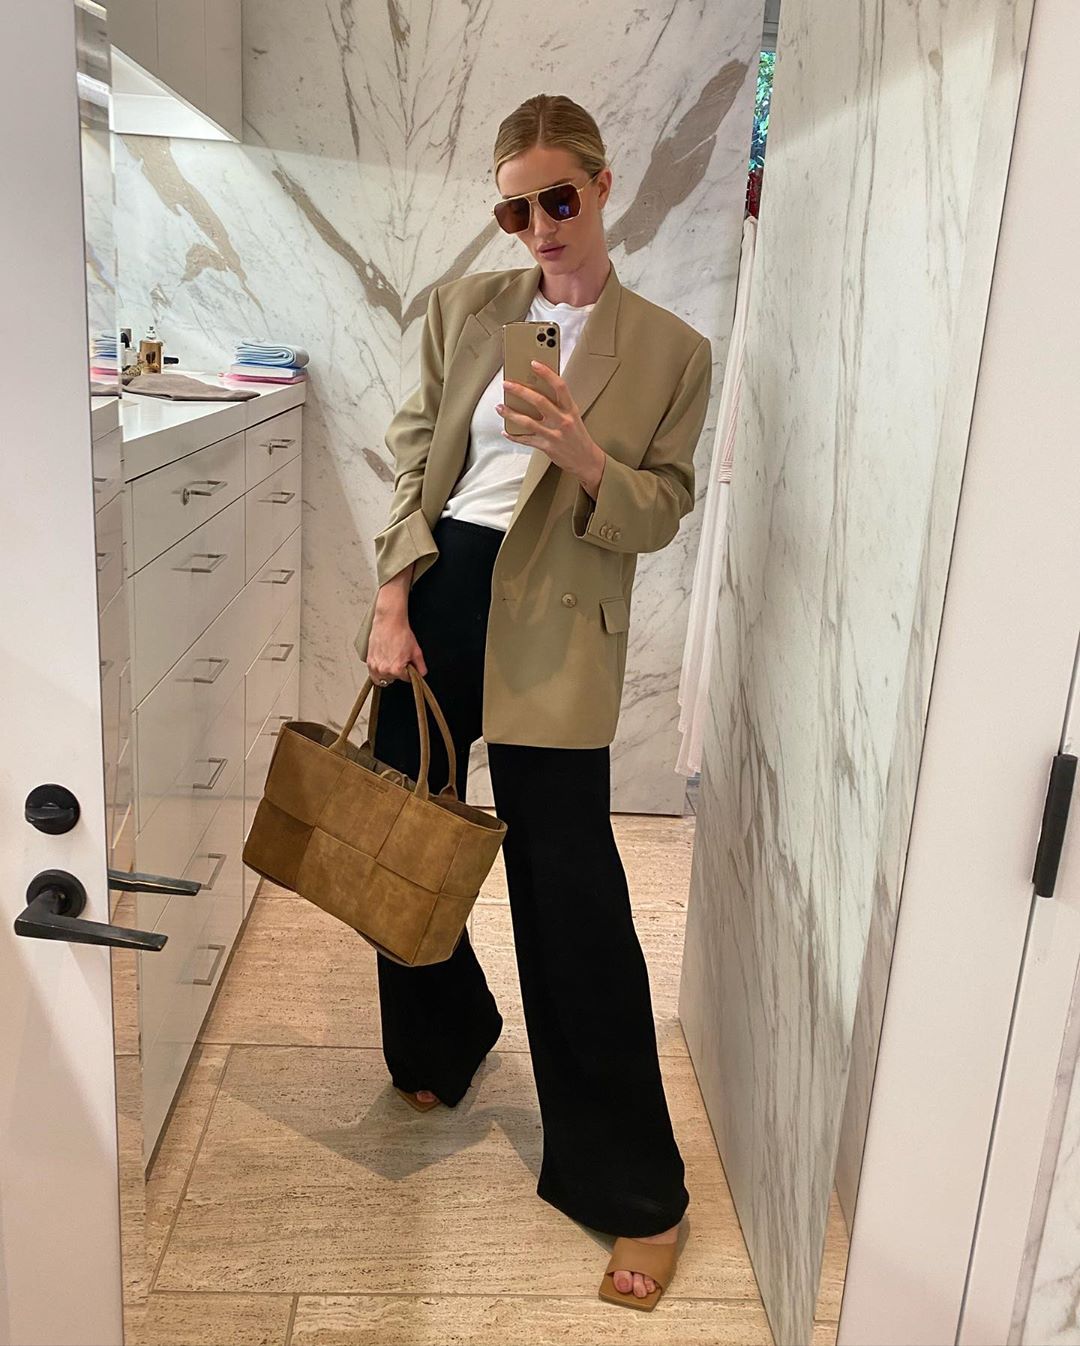 This Model’s Mirror Selfie Outfit is Everything